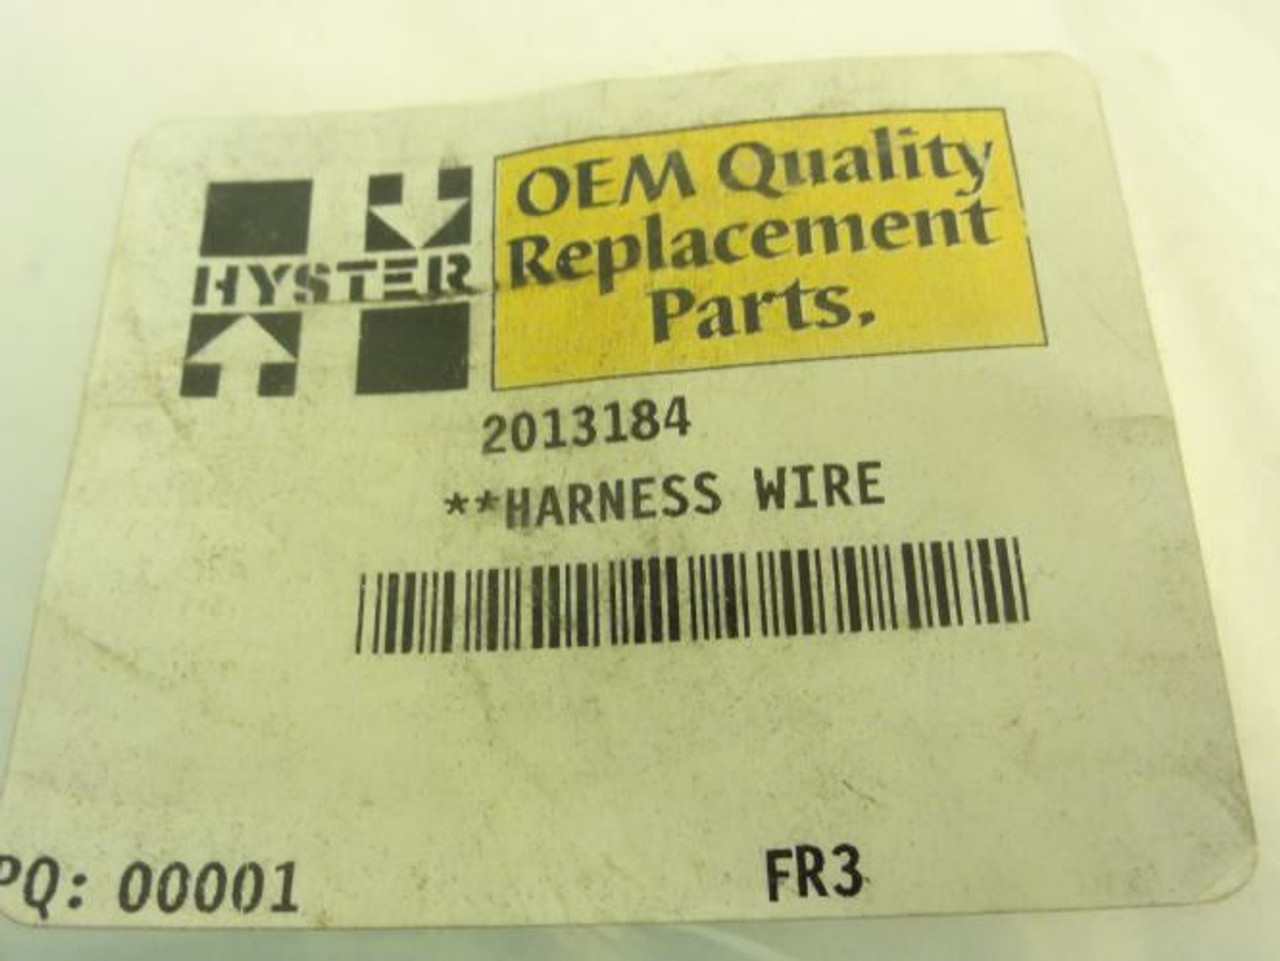 Hyster 2013184; Wire Harness